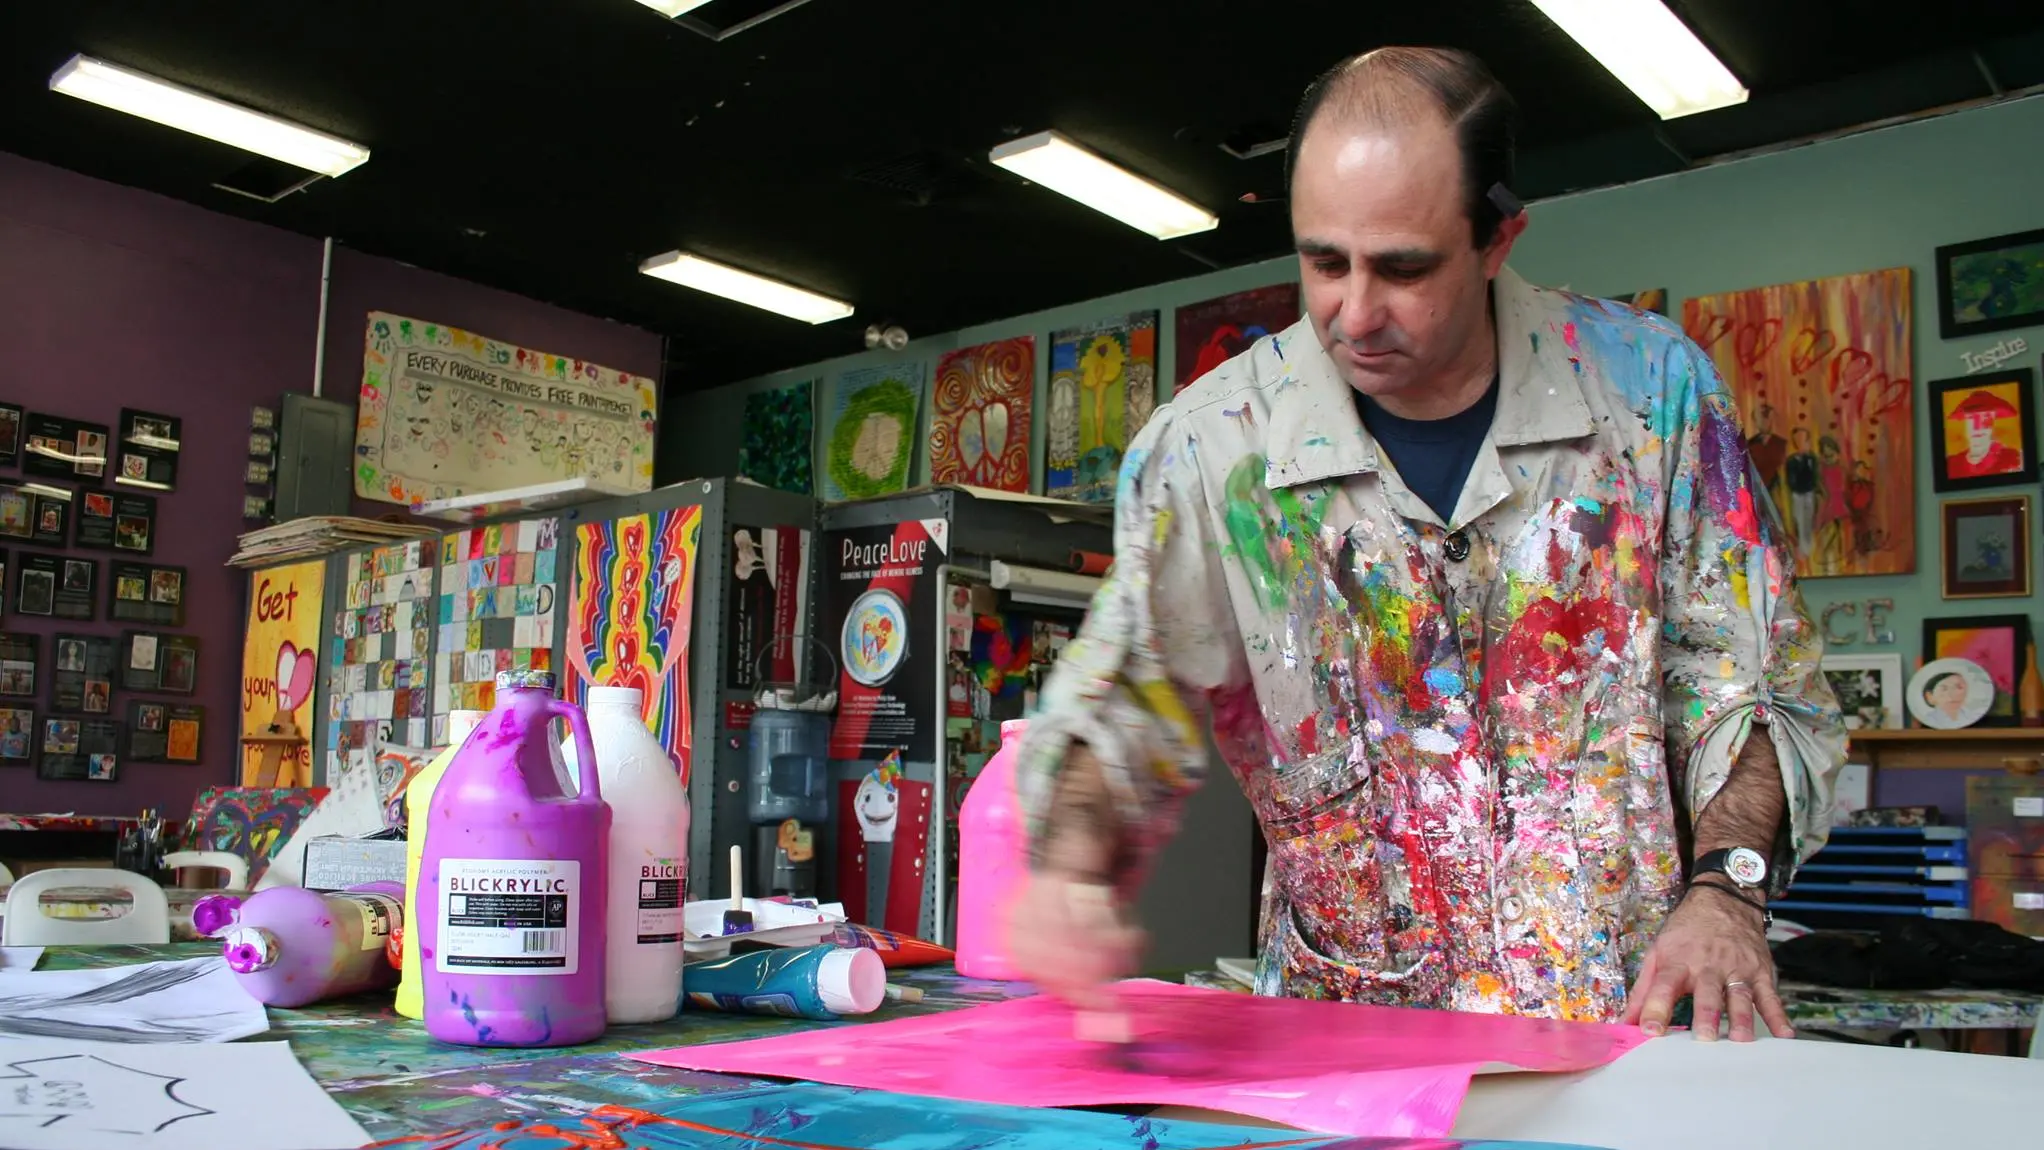 Wearing a paint-splattered smock, a man slightly smiles slightly while painting in his colorful studio.